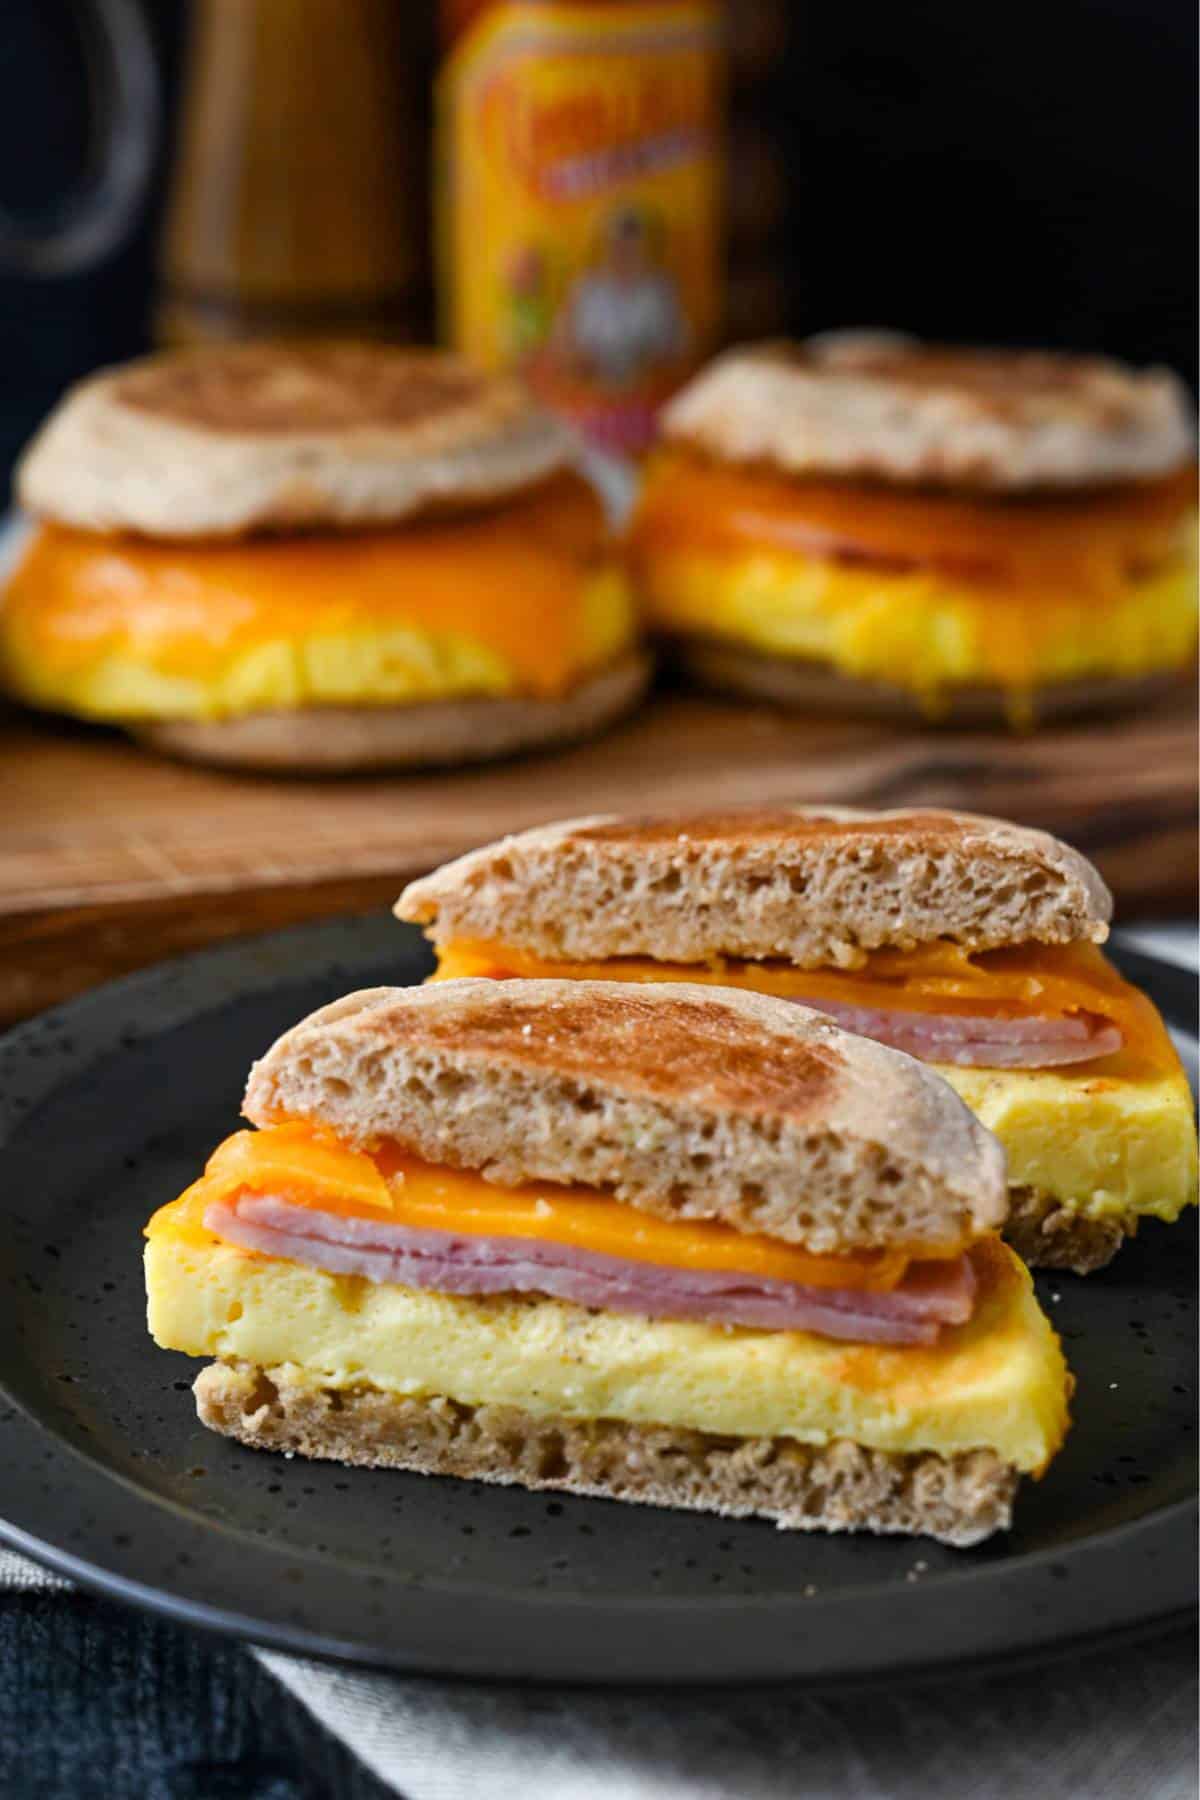 a homemade egg mcmuffin sliced in half with 3 egg mcmuffins on a serving board behind it with a bottle of hot sauce